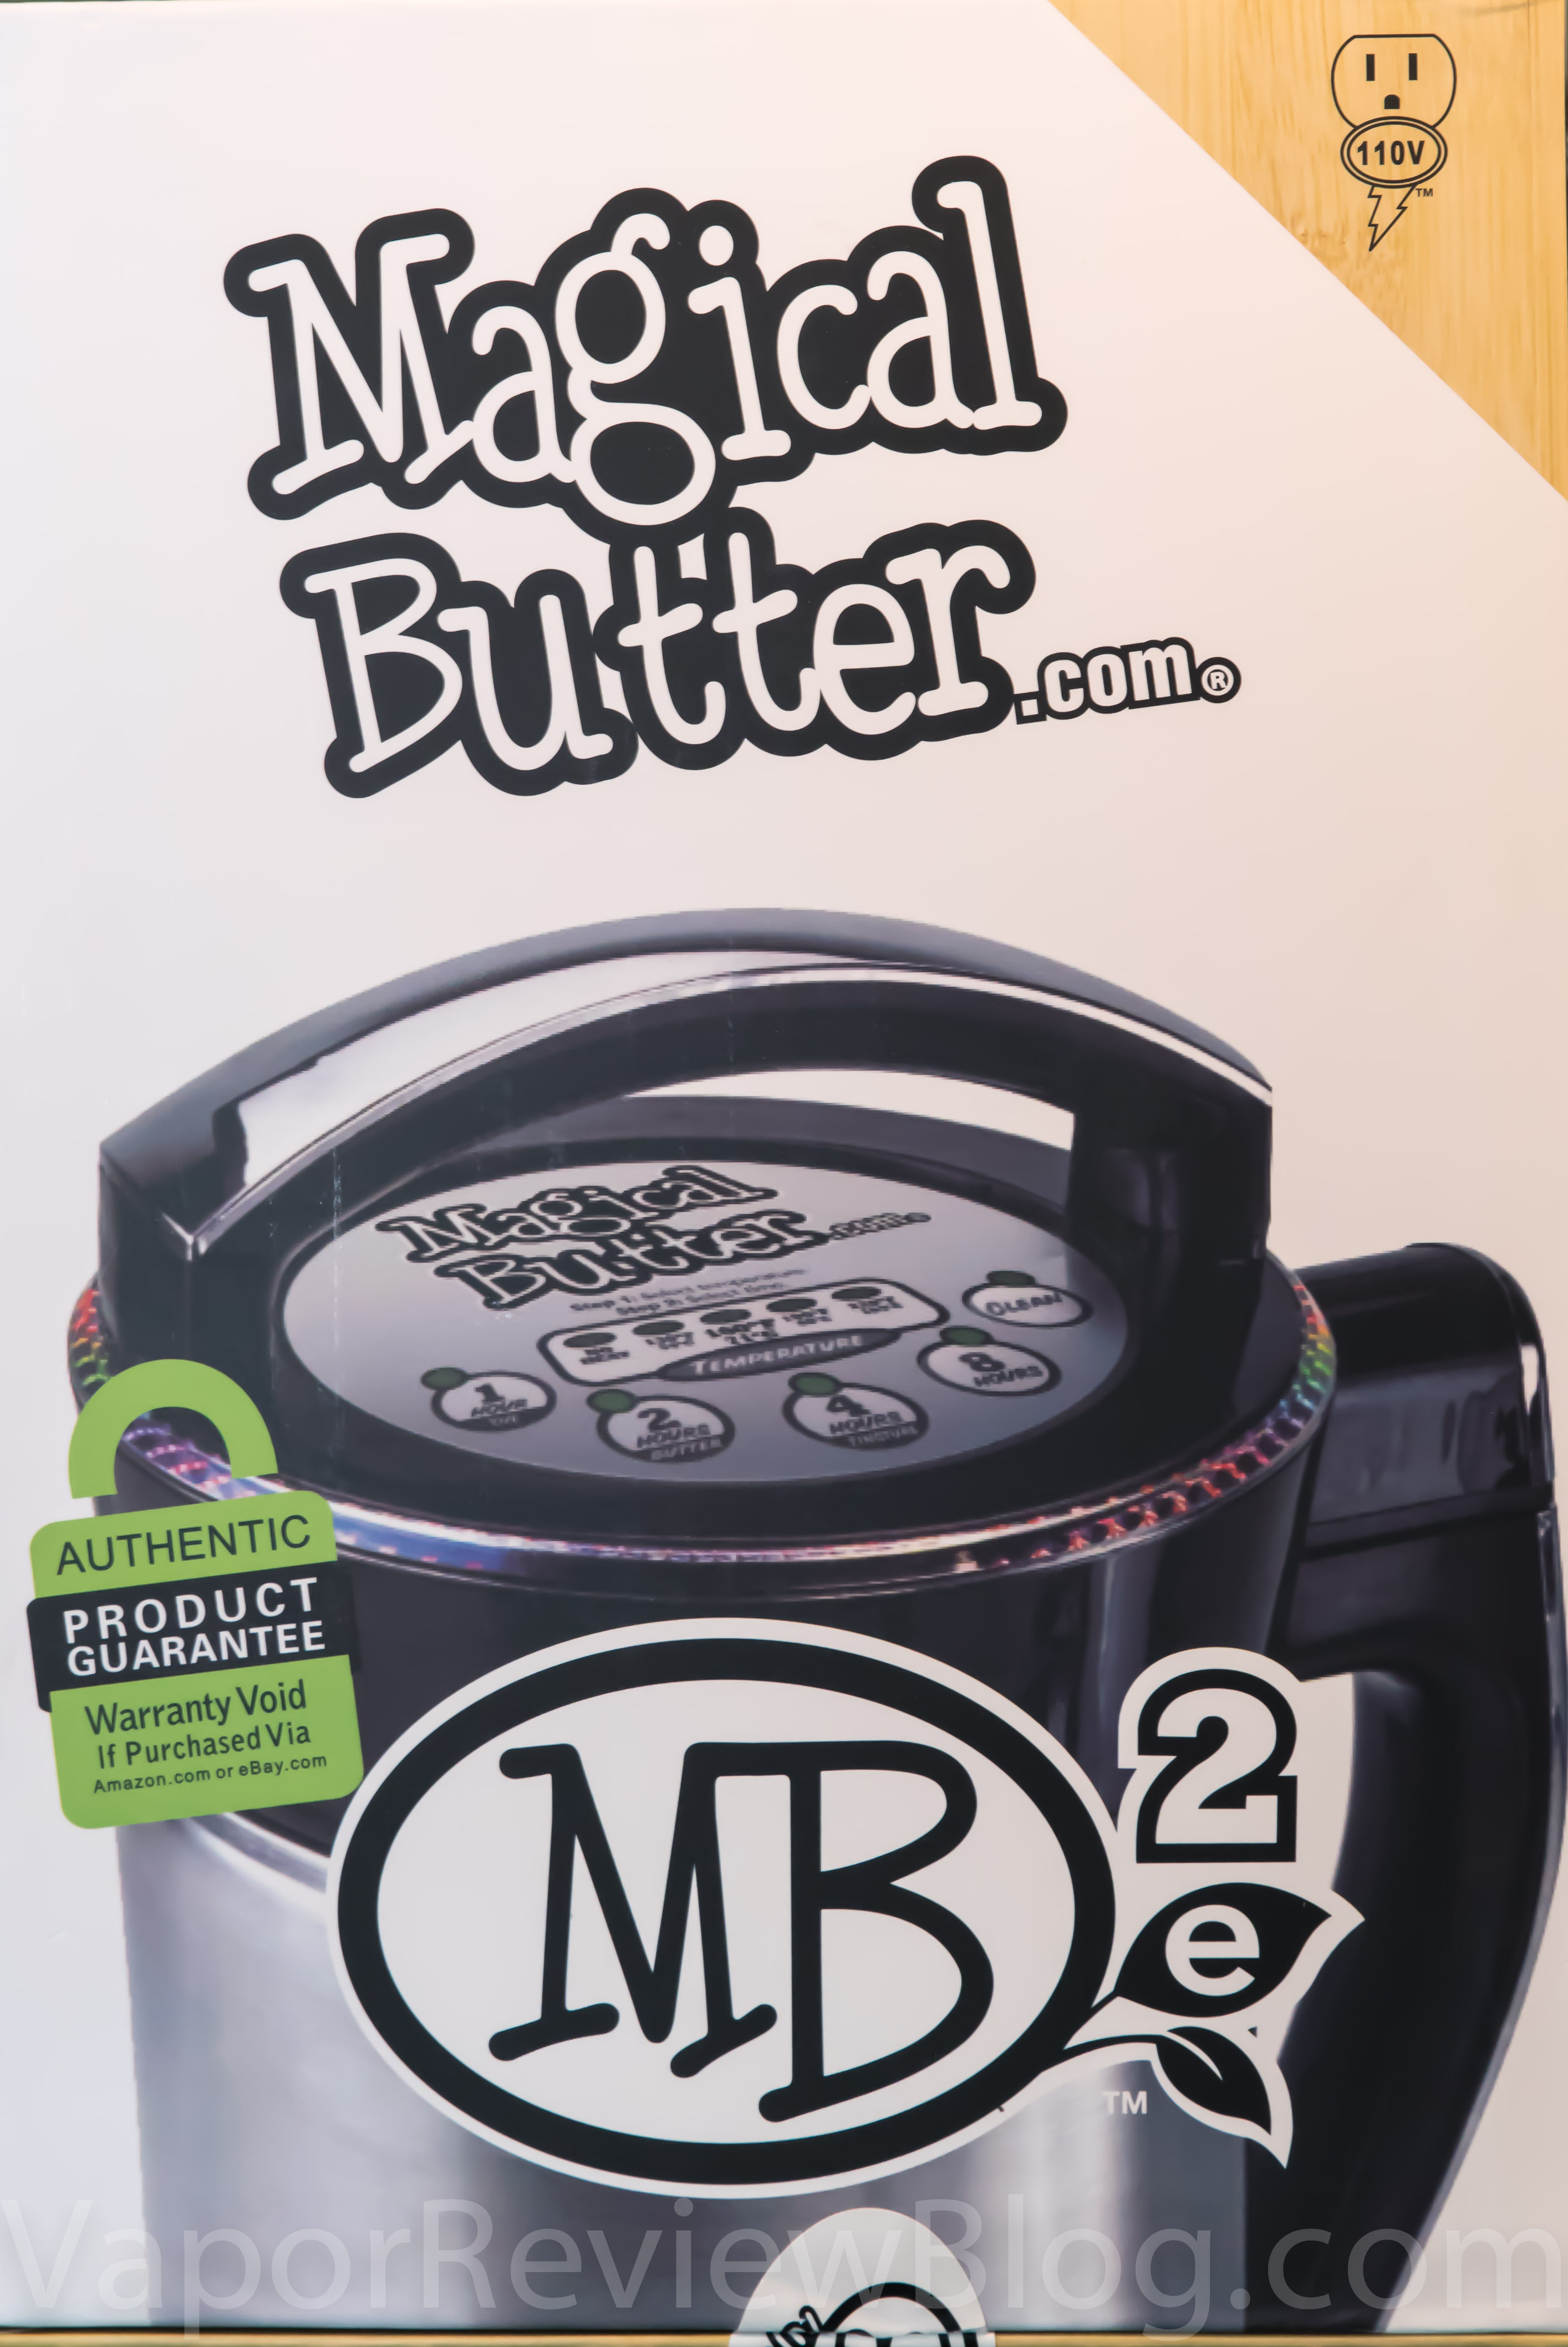 Magical Butter Machine Review 